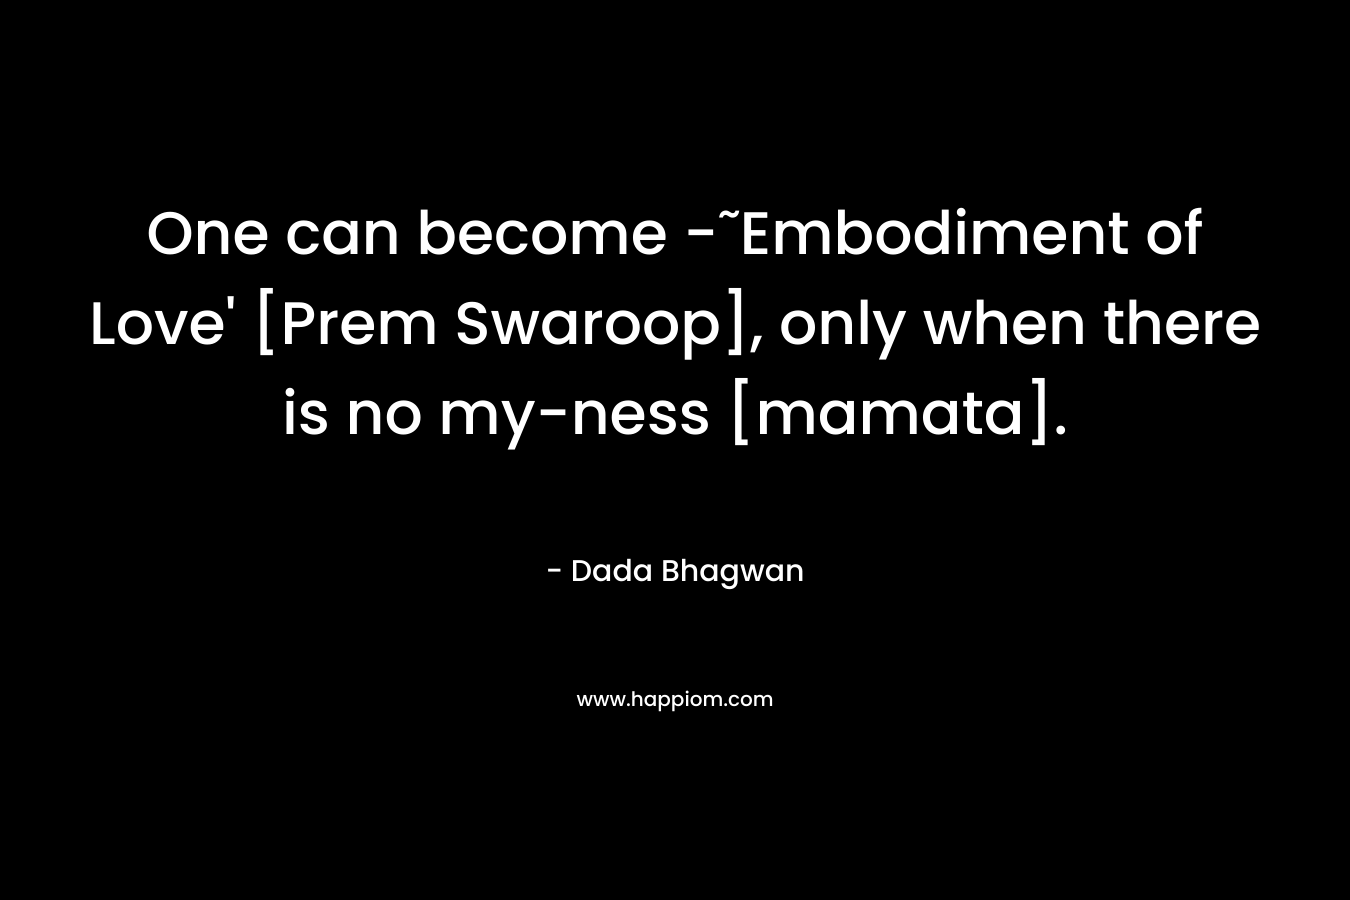 One can become -˜Embodiment of Love' [Prem Swaroop], only when there is no my-ness [mamata].